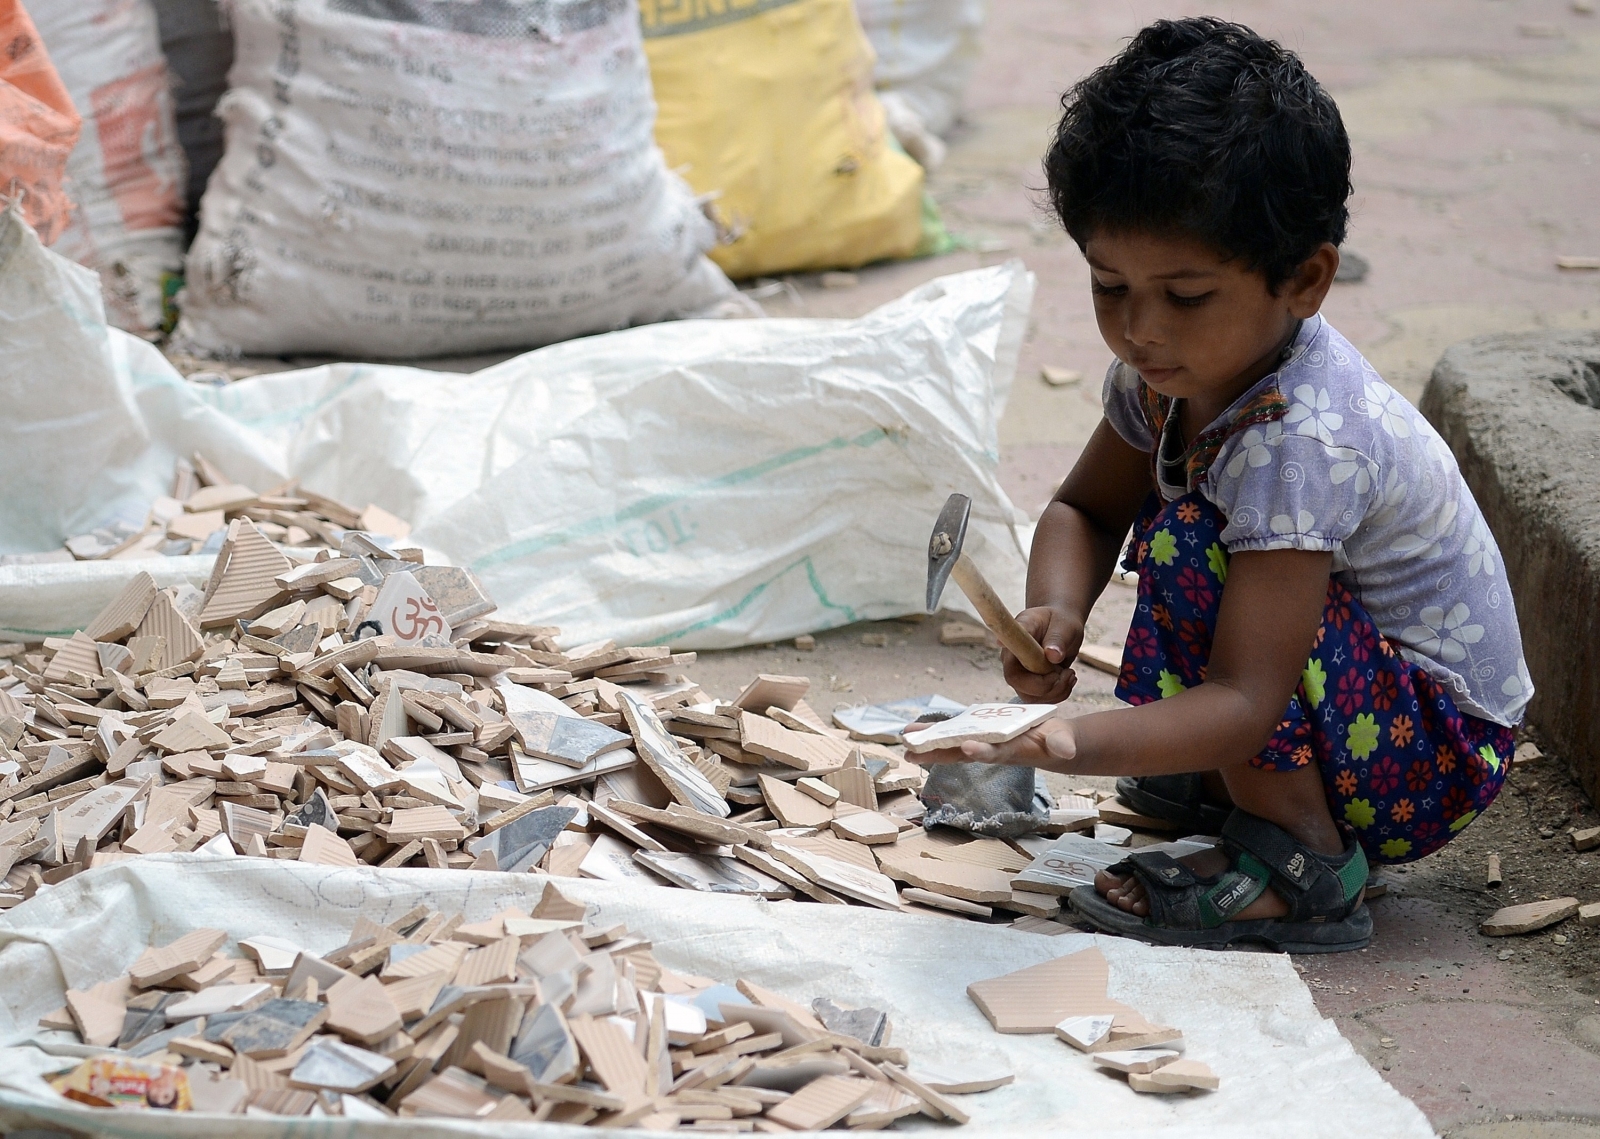 Simple essay on child labour in india